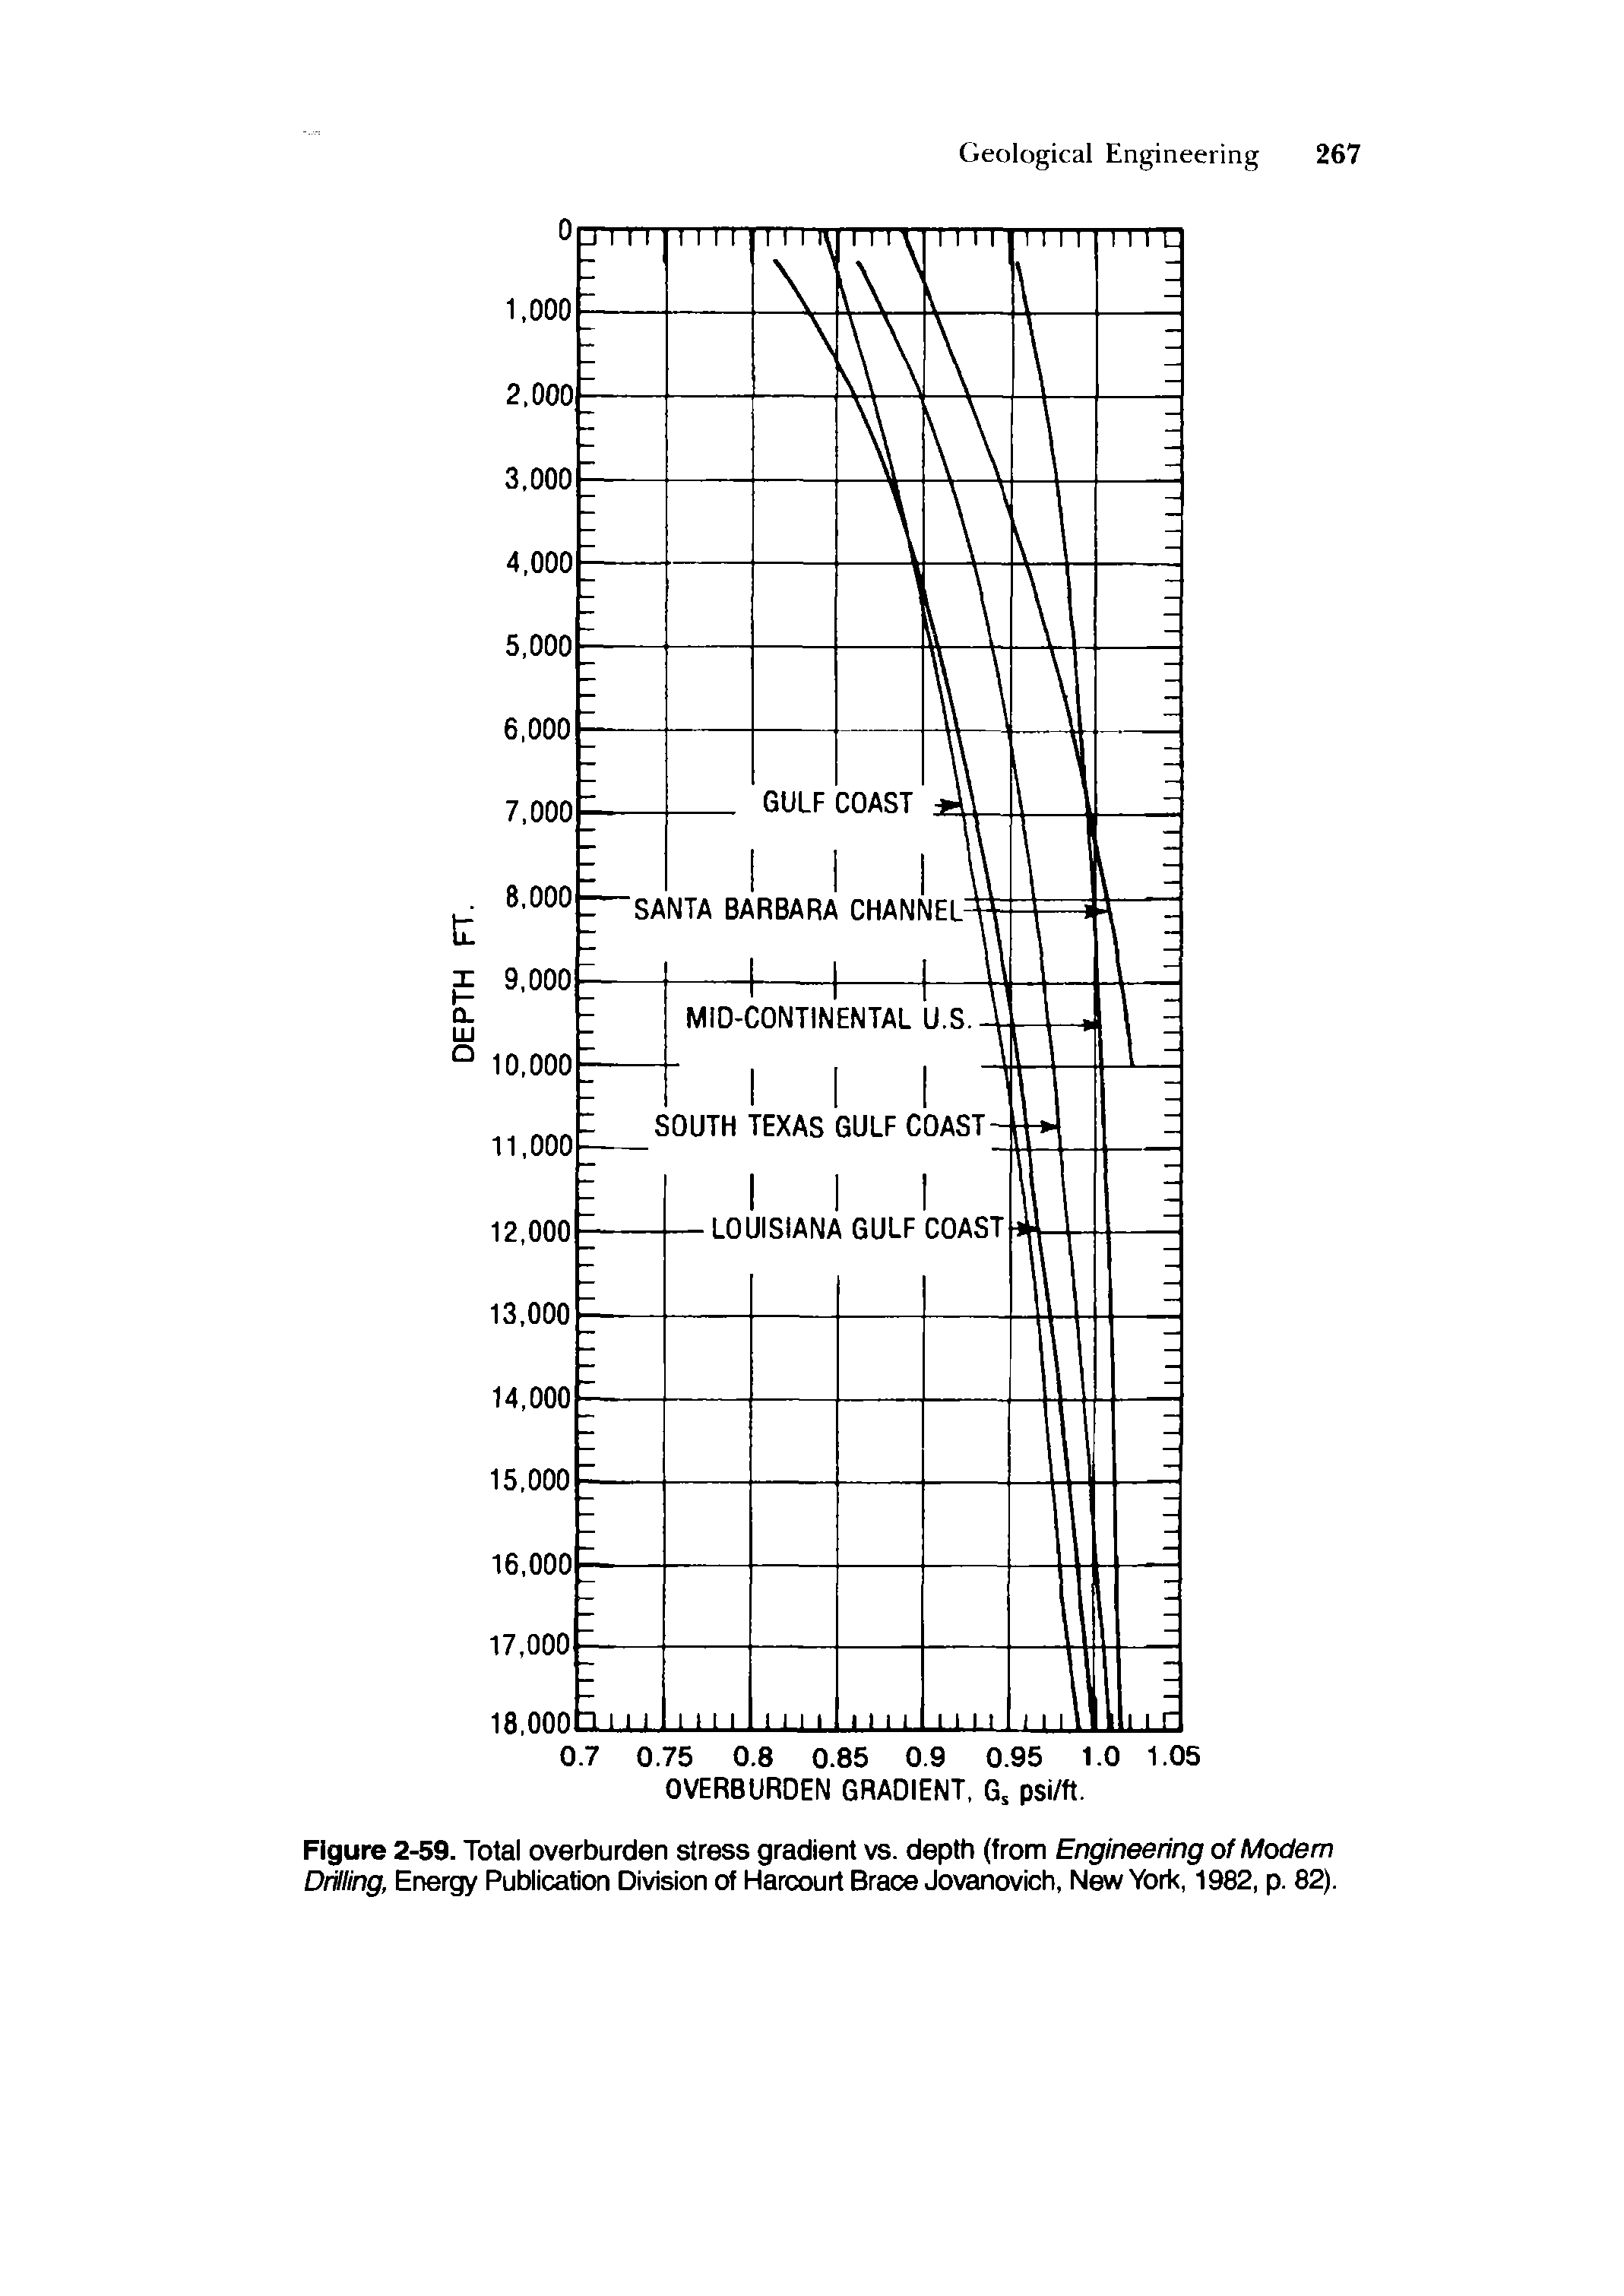 Figure 2-59. Total overburden stress gradient vs. depth (from Engineering of Modem DiWng, Energy Publication Division of Harcourt Brace Jovanovich, New York, 1982, p. 82).